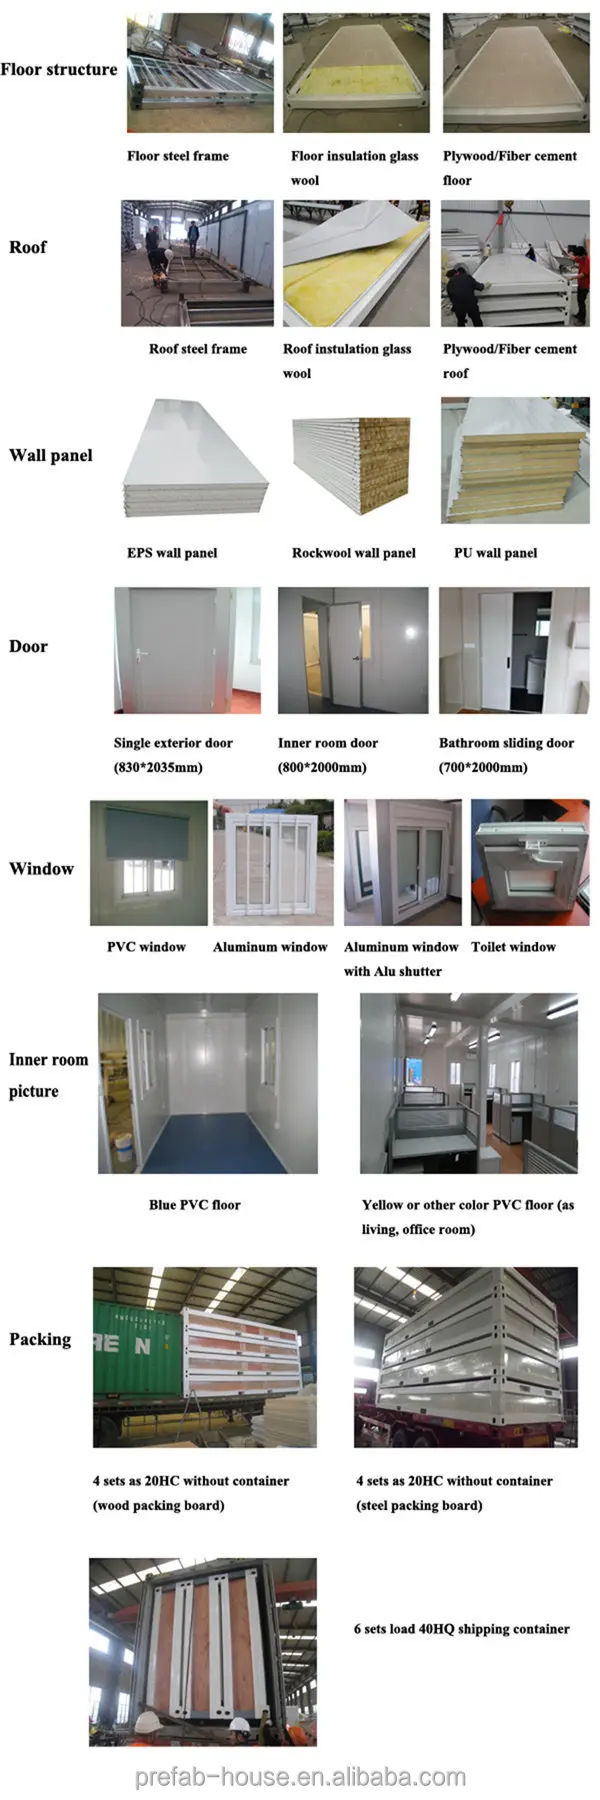 Lida Group storage containers made into homes factory used as kitchen, shower room-4